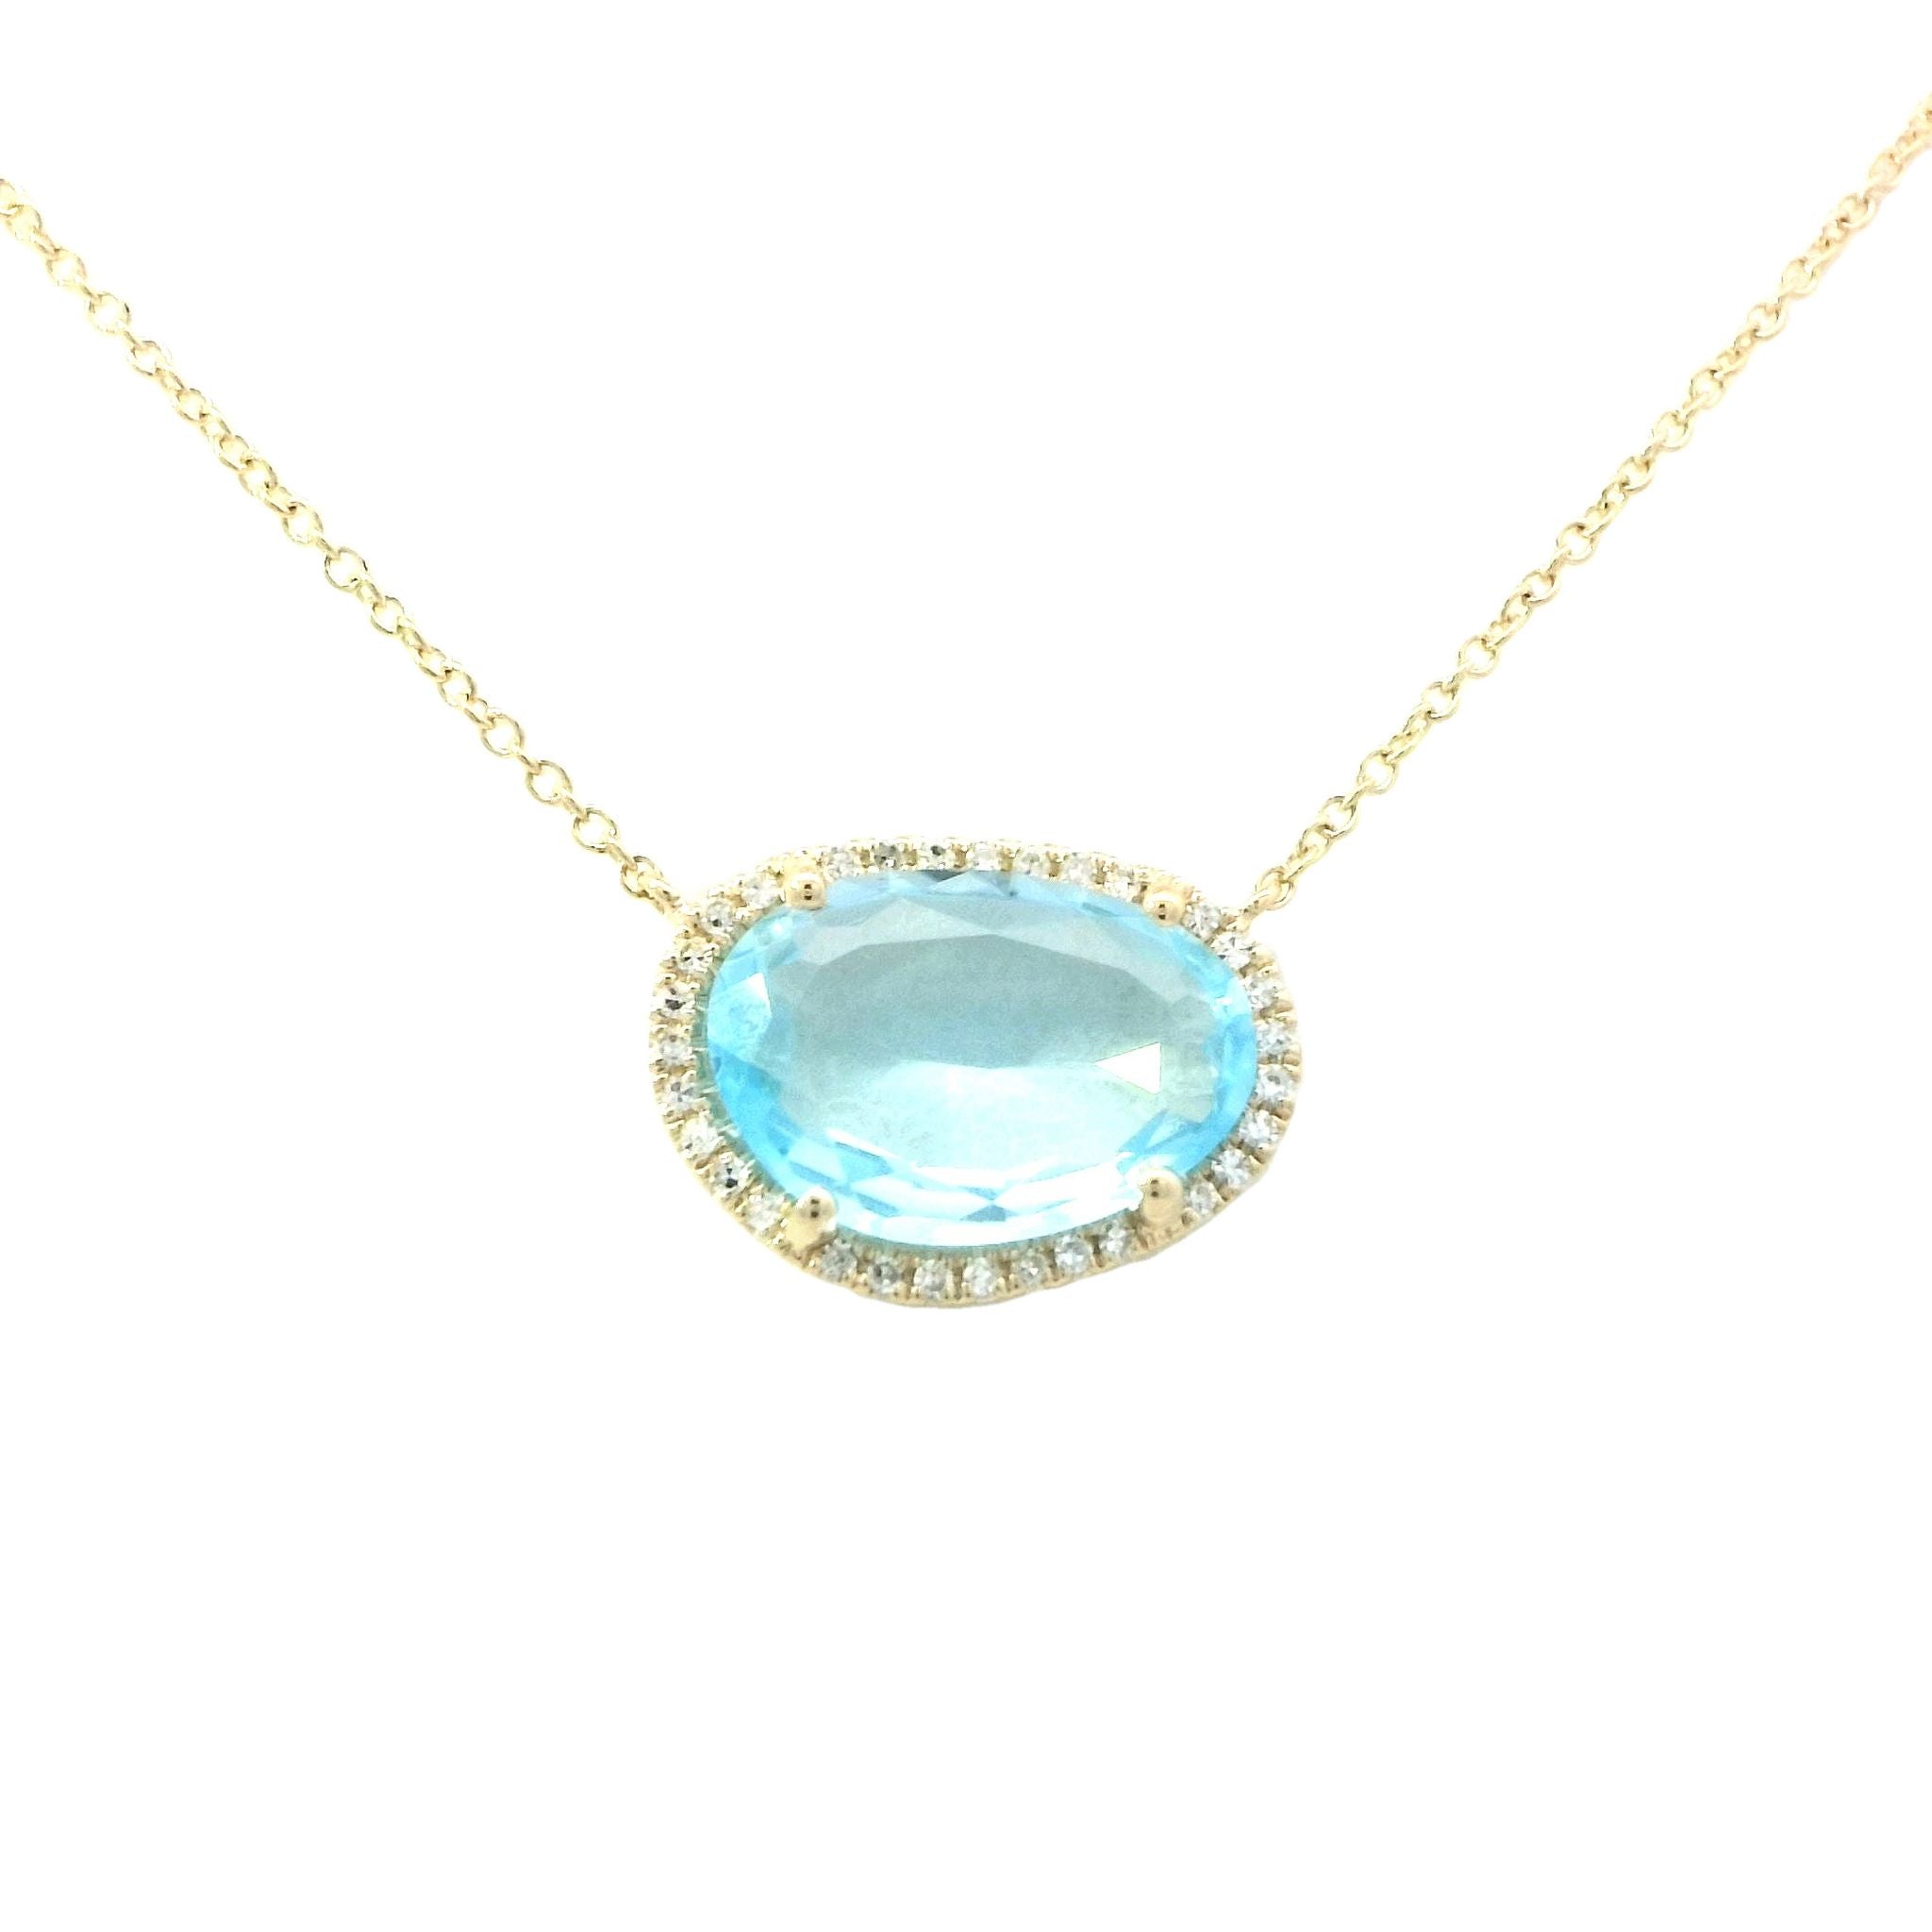 Sky Blue Topaz Necklace in Yellow Gold